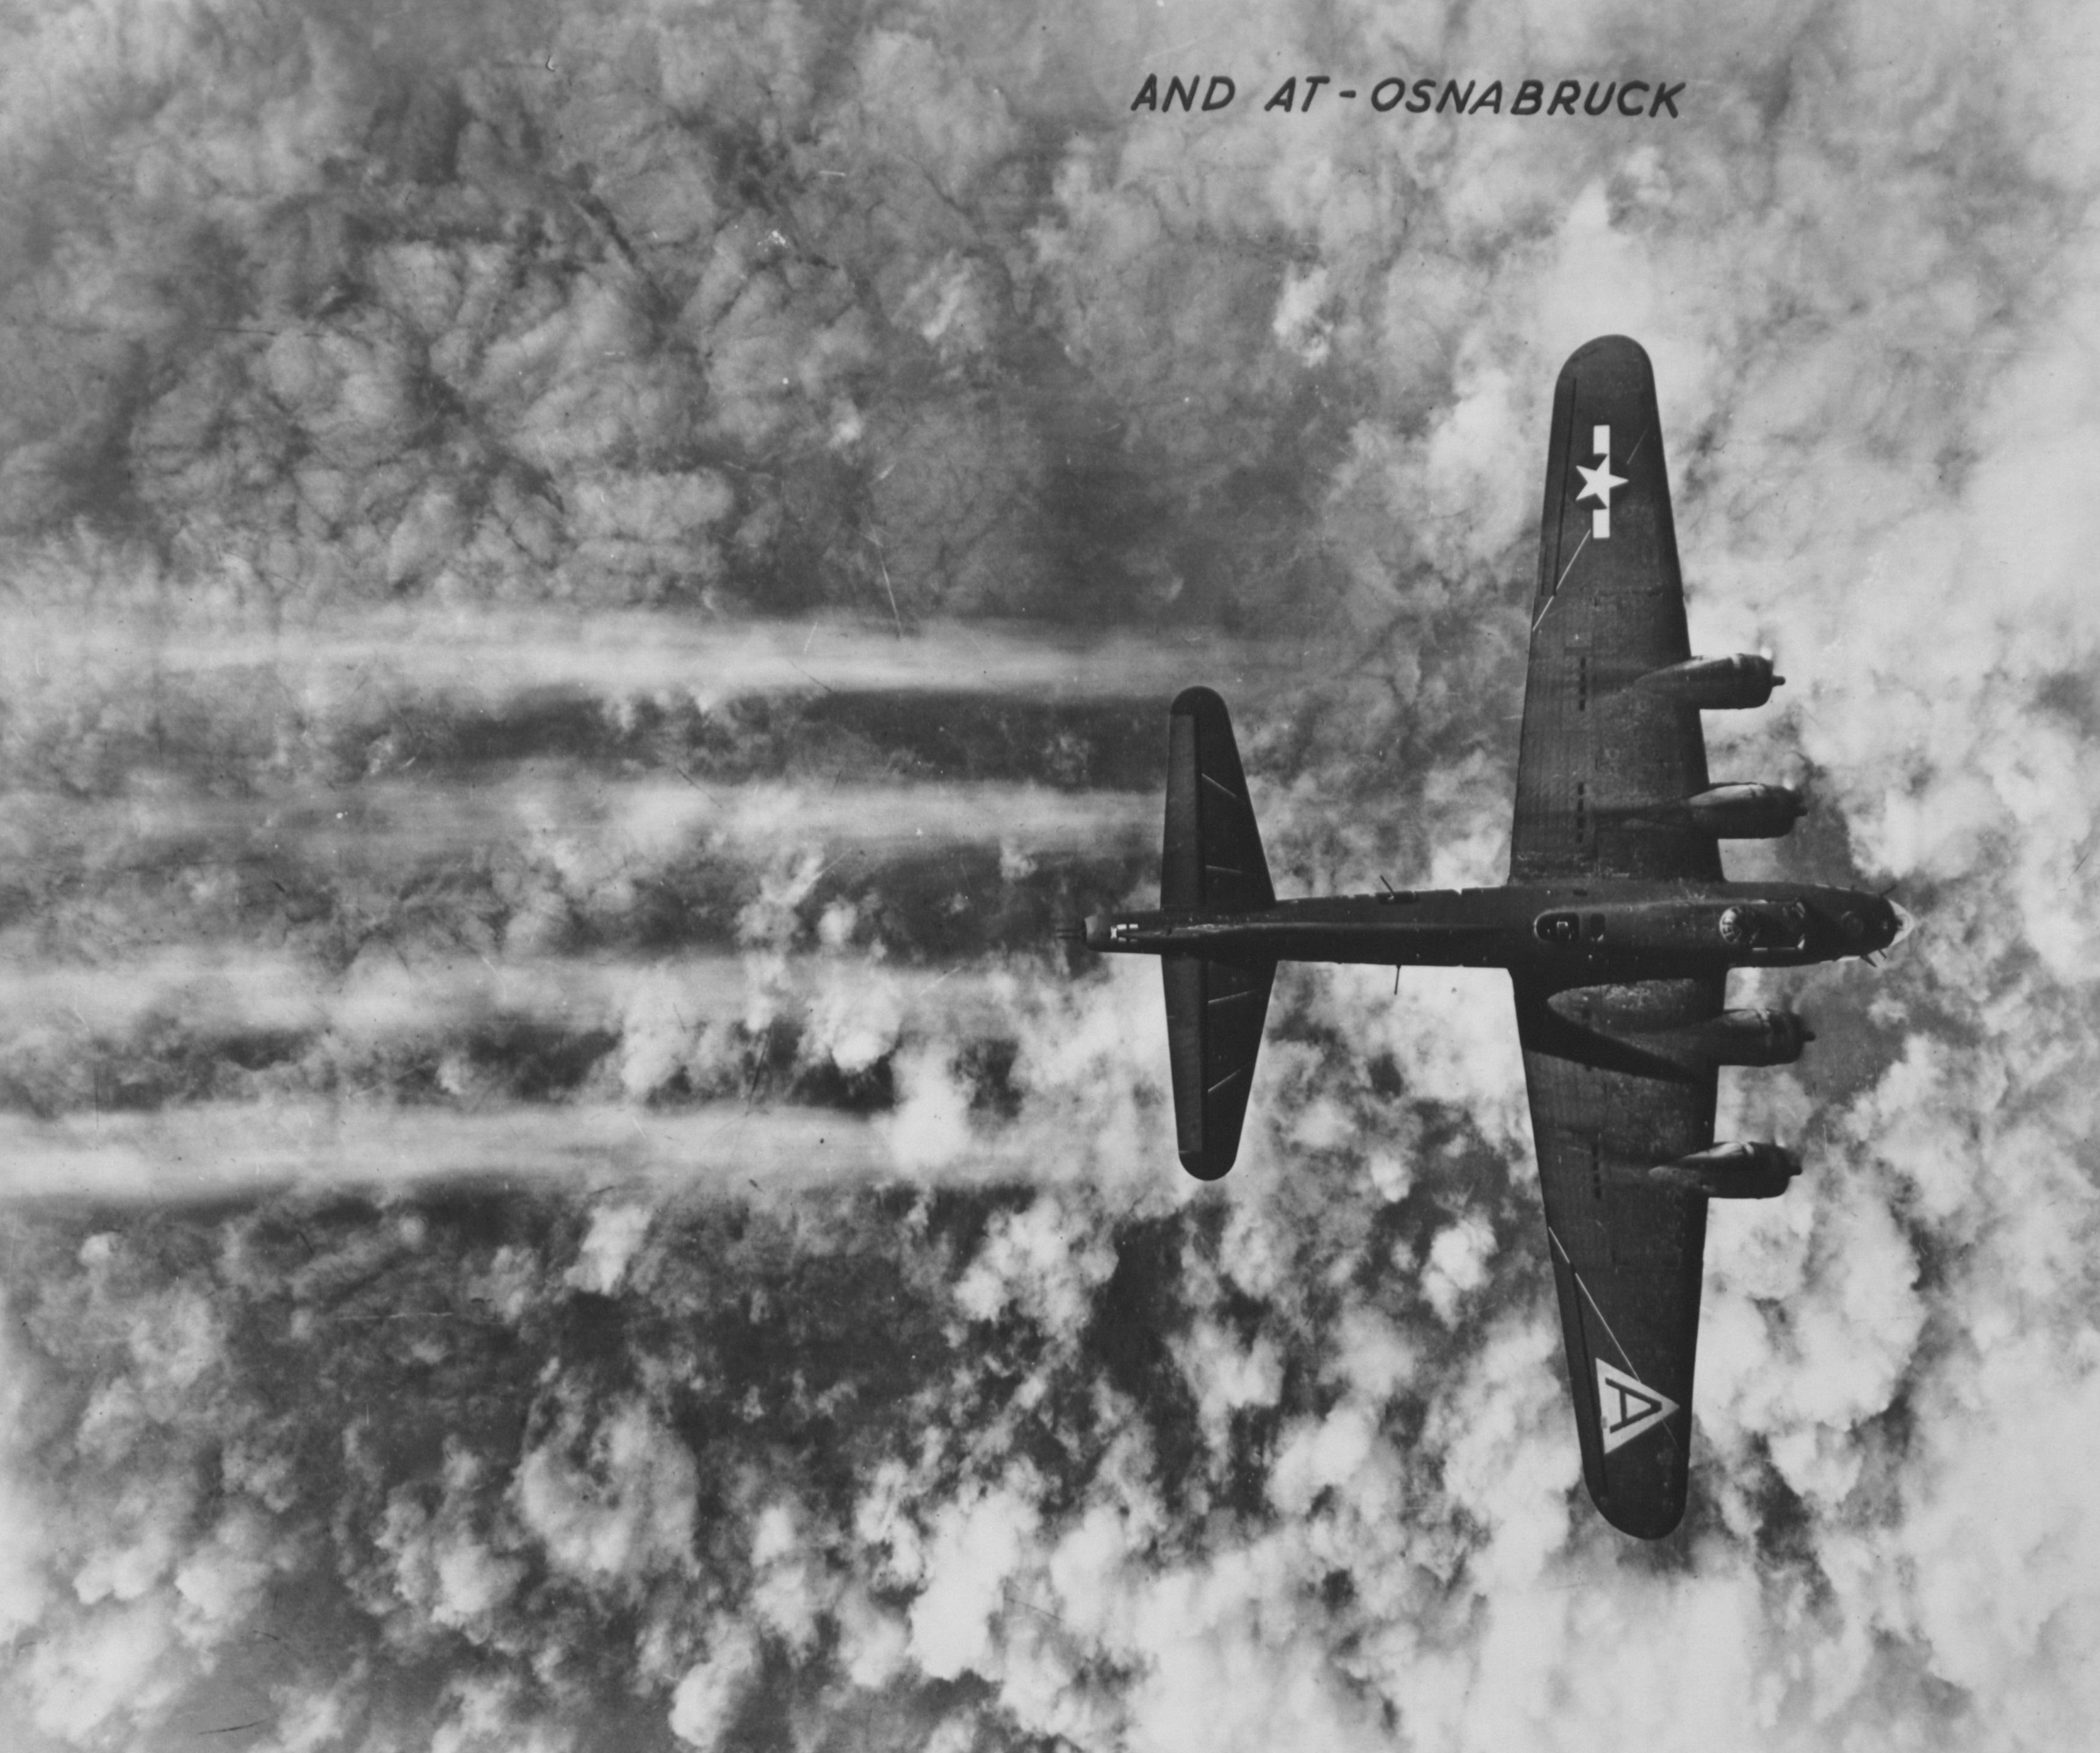 Boeing B-17 Flying Fortress over Osnabruck, Germany. Blind bombing is necessary due to the thick clouds over the target. The bomber is of the 91st Bomb Group.